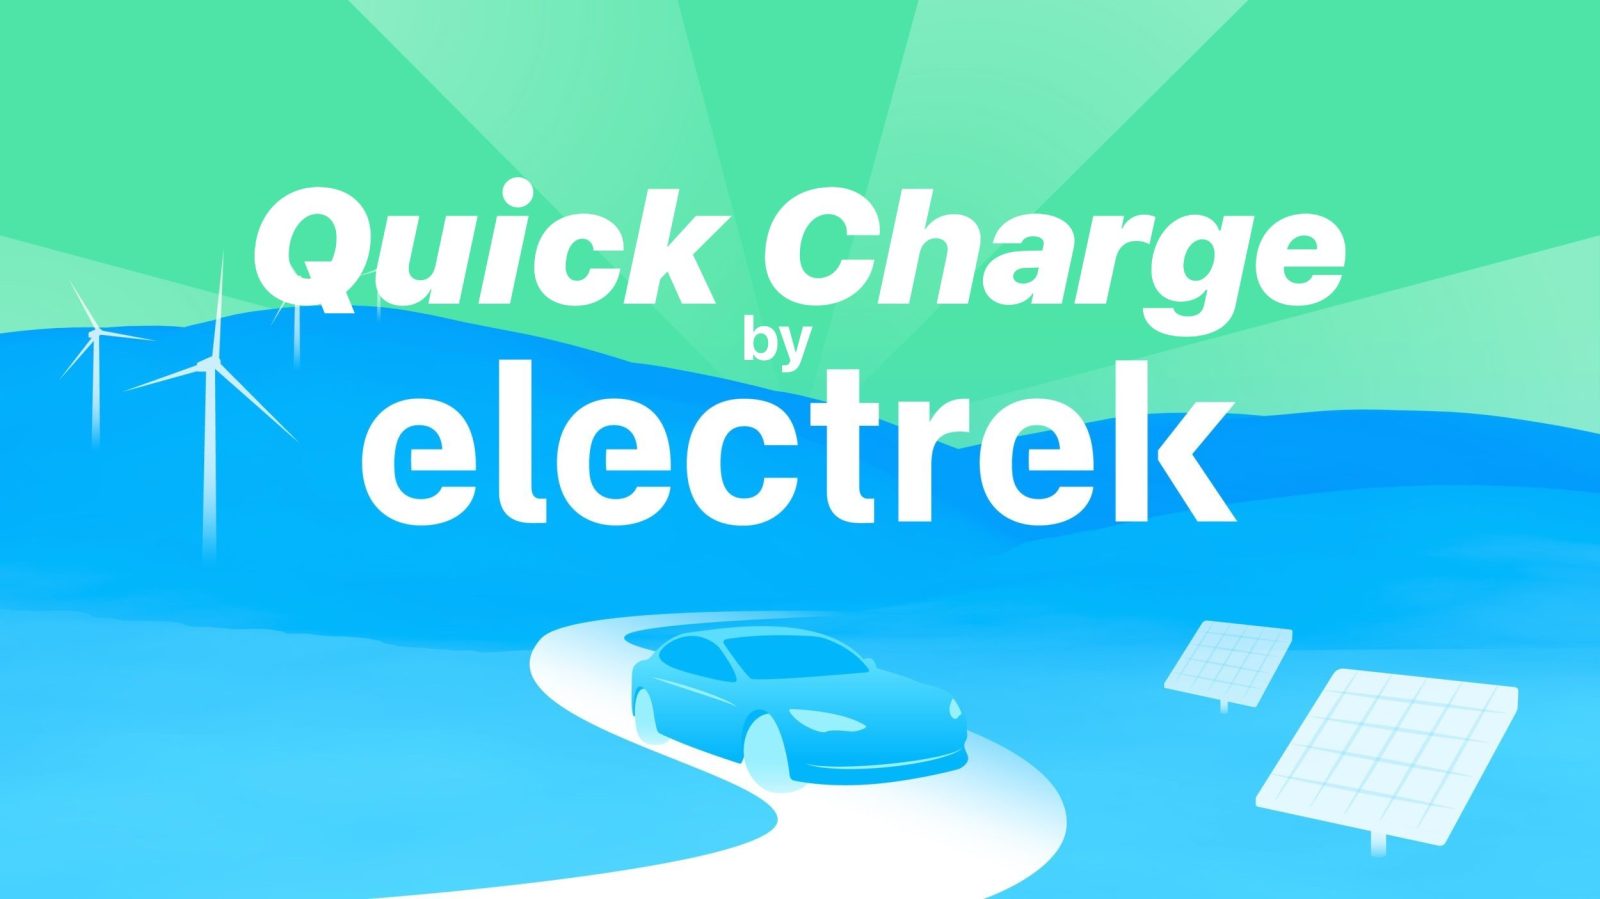 Quick Charge Podcast: January 22, 2022